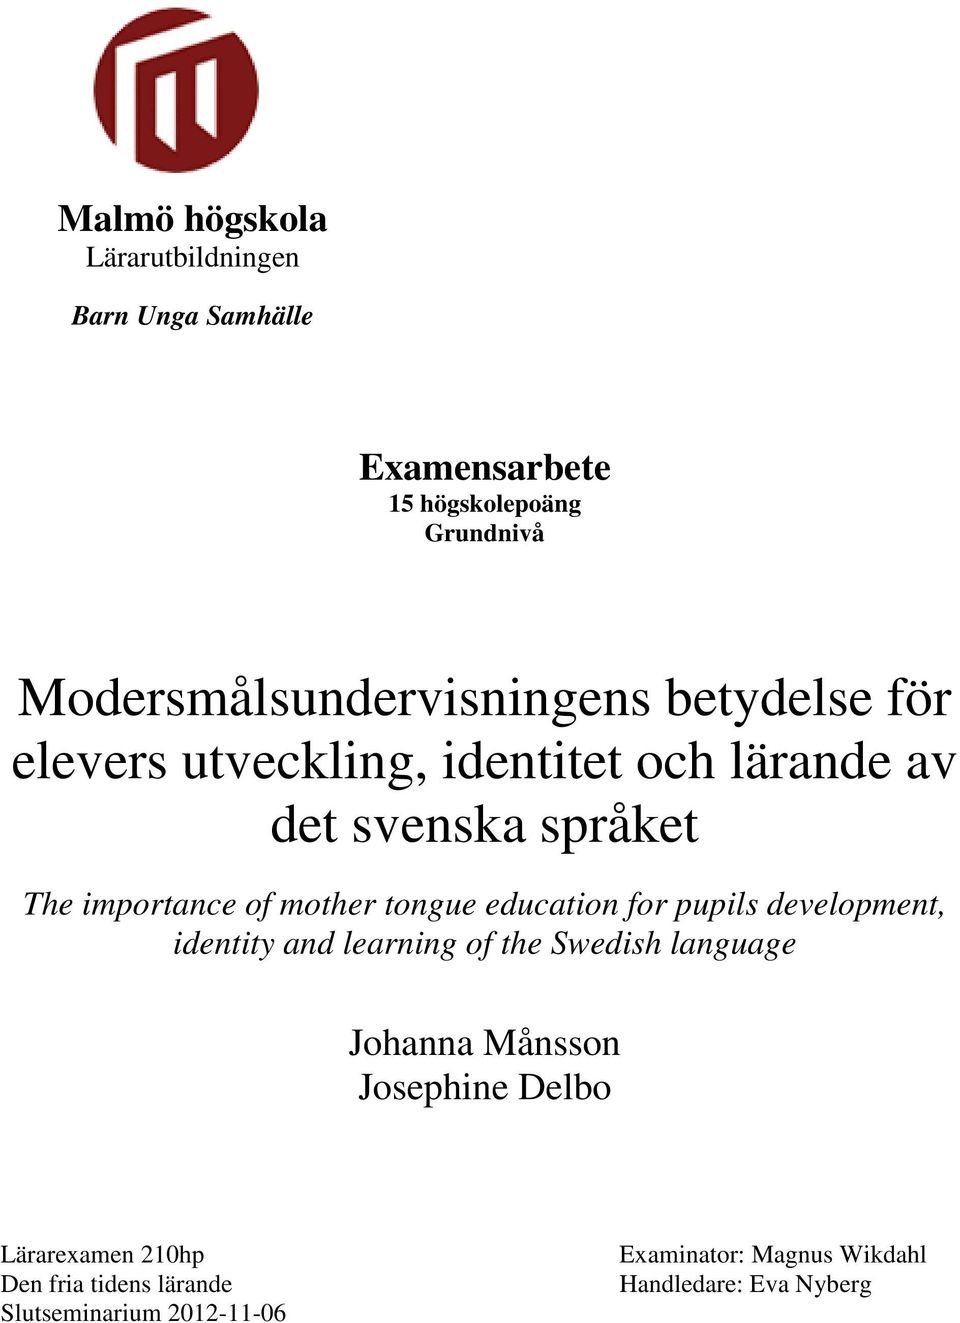 importance of mother tongue education for pupils development, identity and learning of the Swedish language